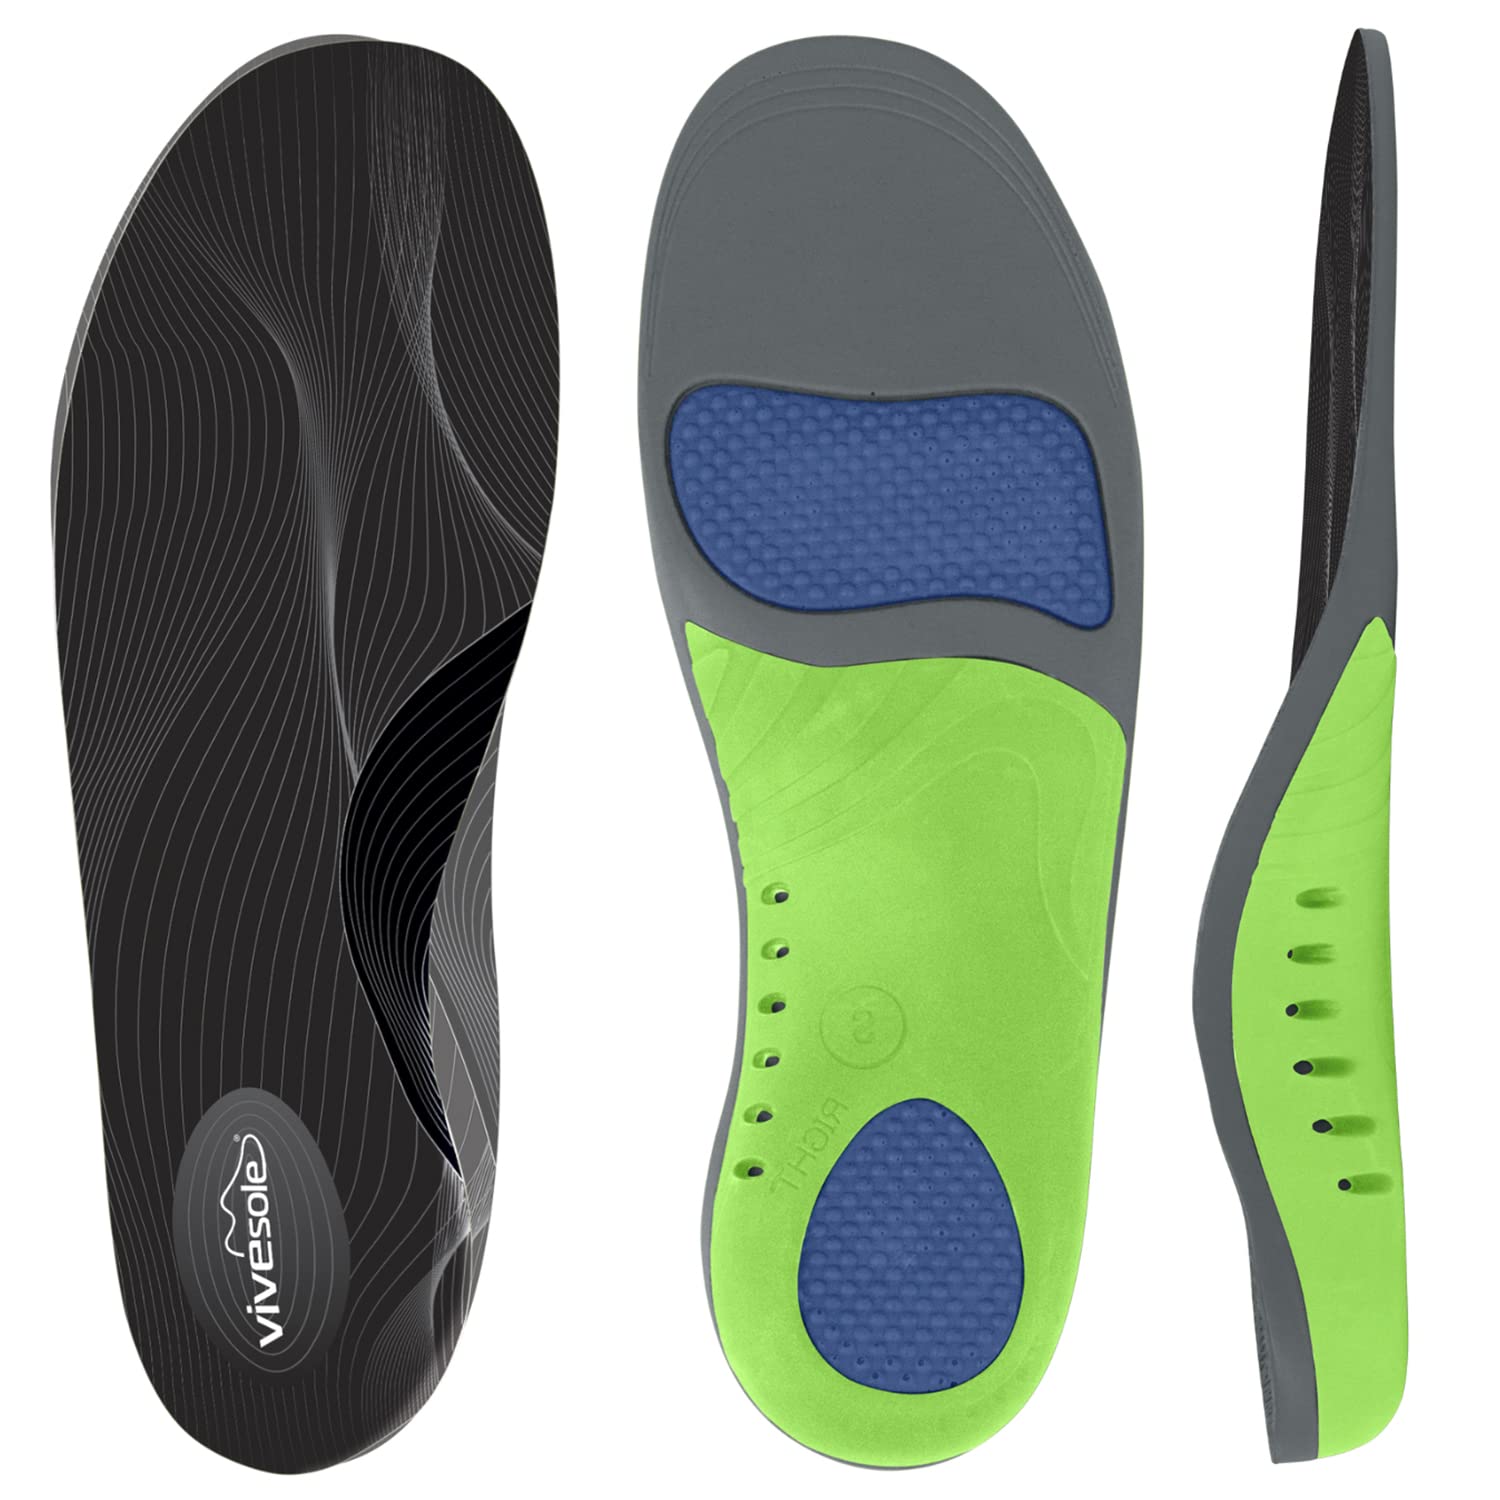 ViveSole Heavy Duty Gel Insoles - Arch Support Shoe Insert for